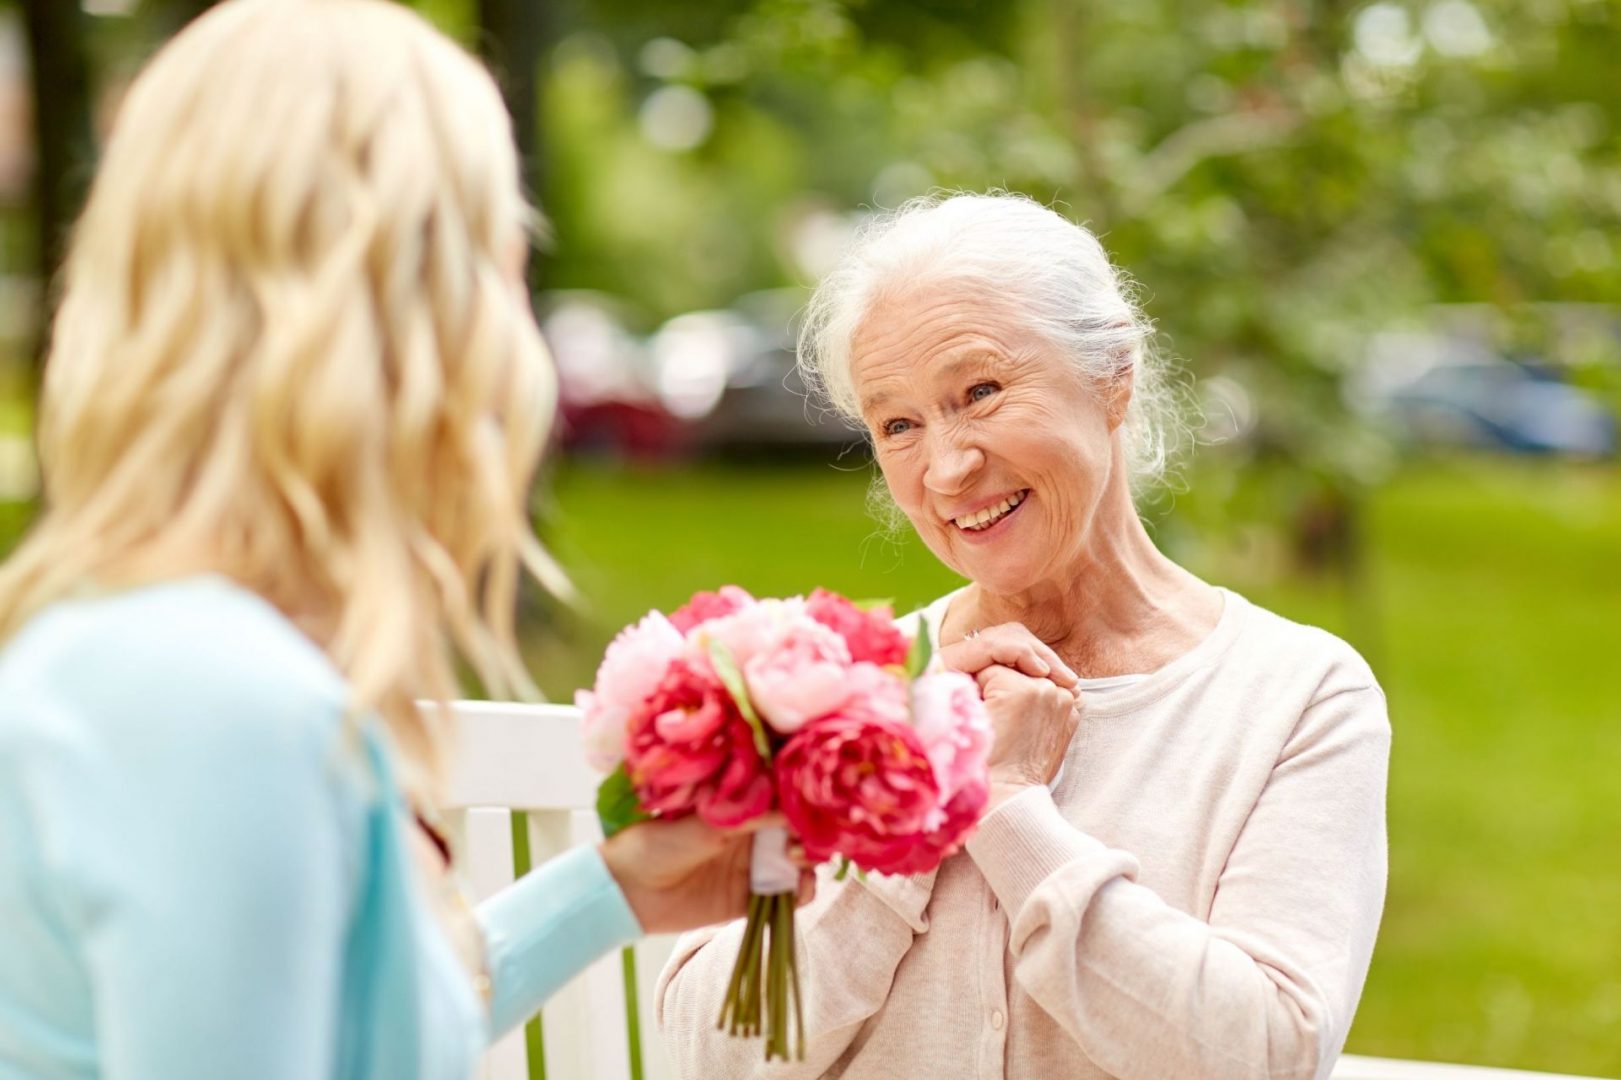 Senior woman smiling as she receives flower bouquet from young woman outdoors.